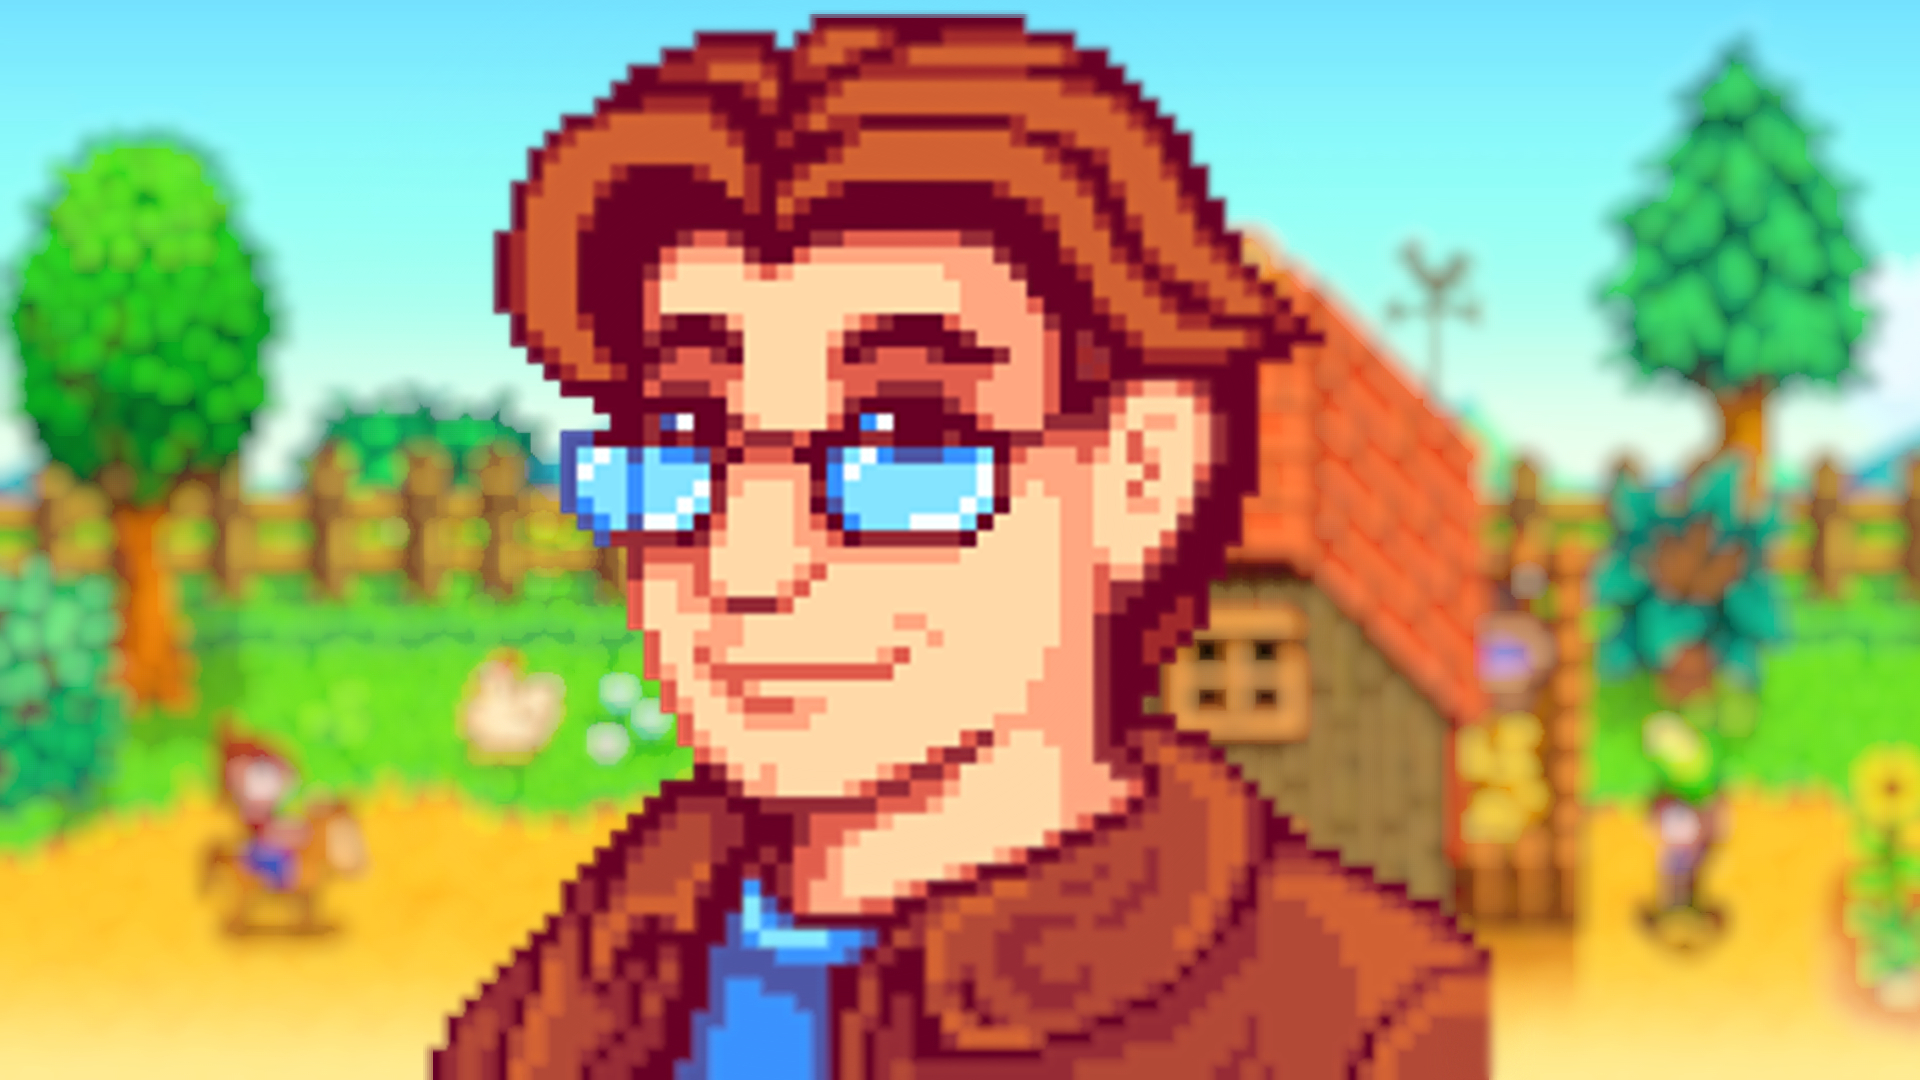 Stardew Valley 1.6 update adds more new content than I expected